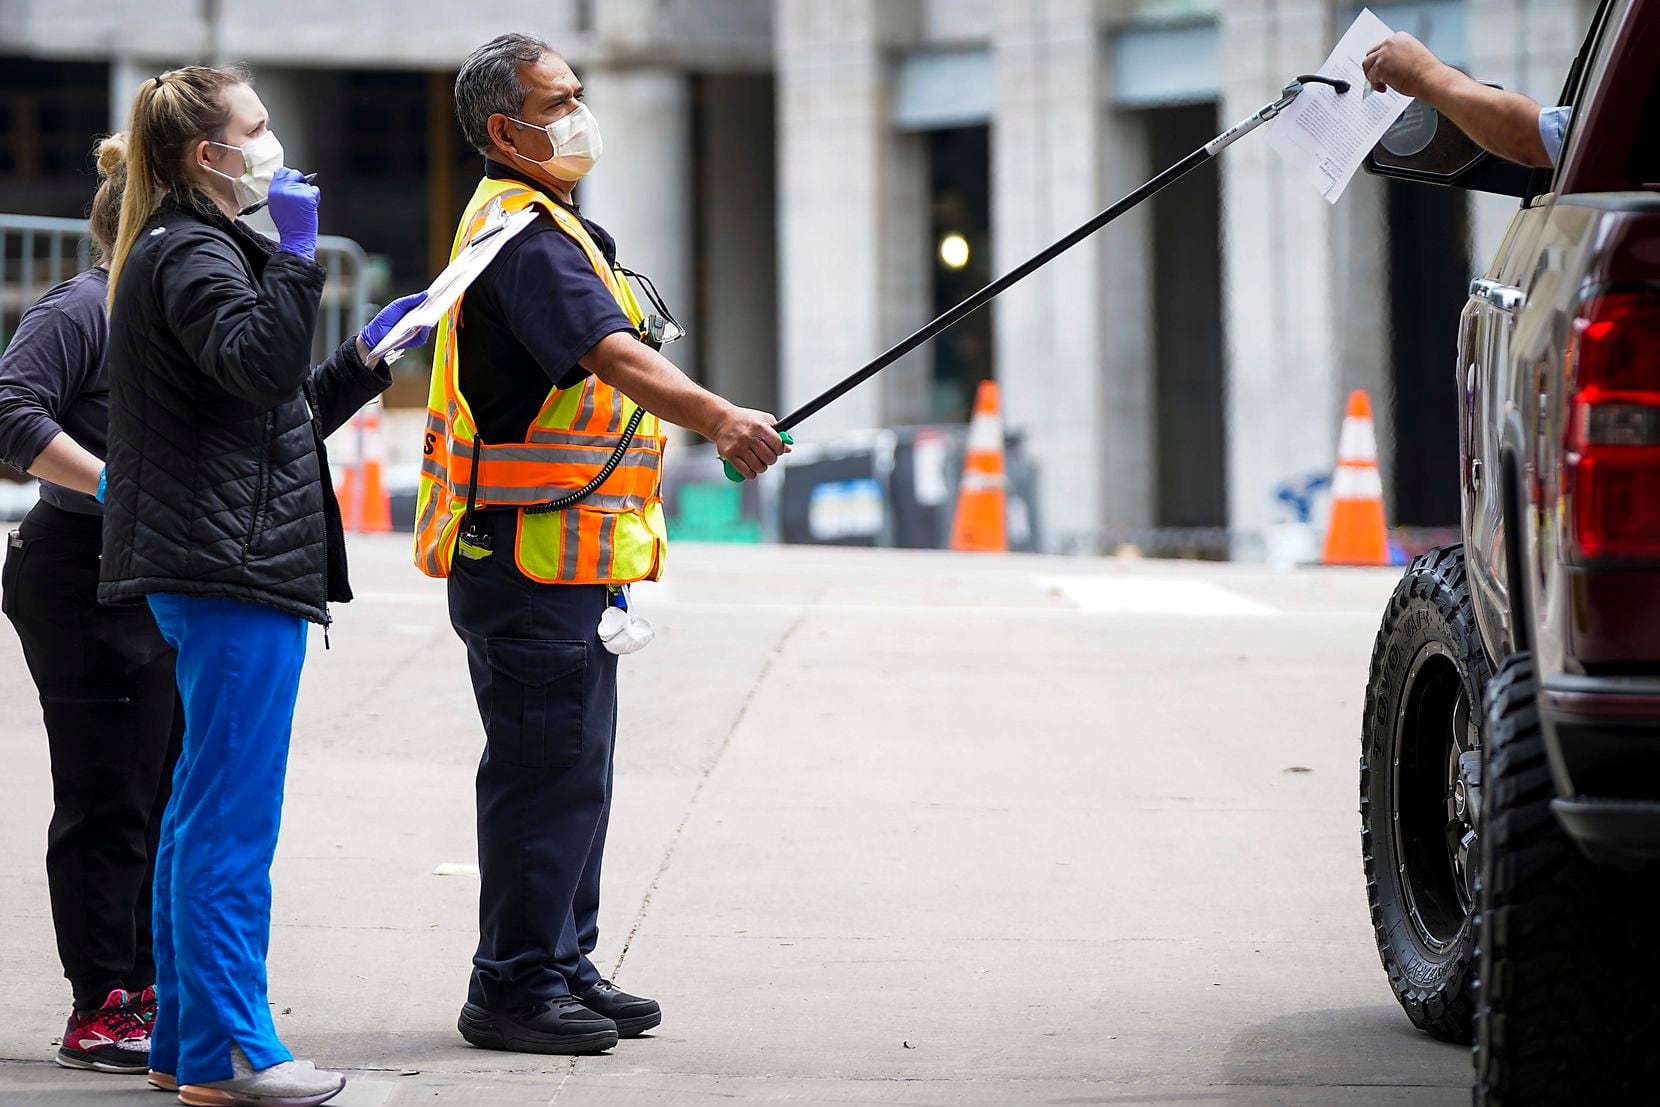 Healthcare workers use a pole to transfer paperwork to a person being tested at a COVID-19 drive-through testing site at American Airlines Center on Monday, April 20, 2020, in Dallas. Employment lawyers say the outbreak will allow companies to require their workers get testing, but legal liability remains in other areas. 